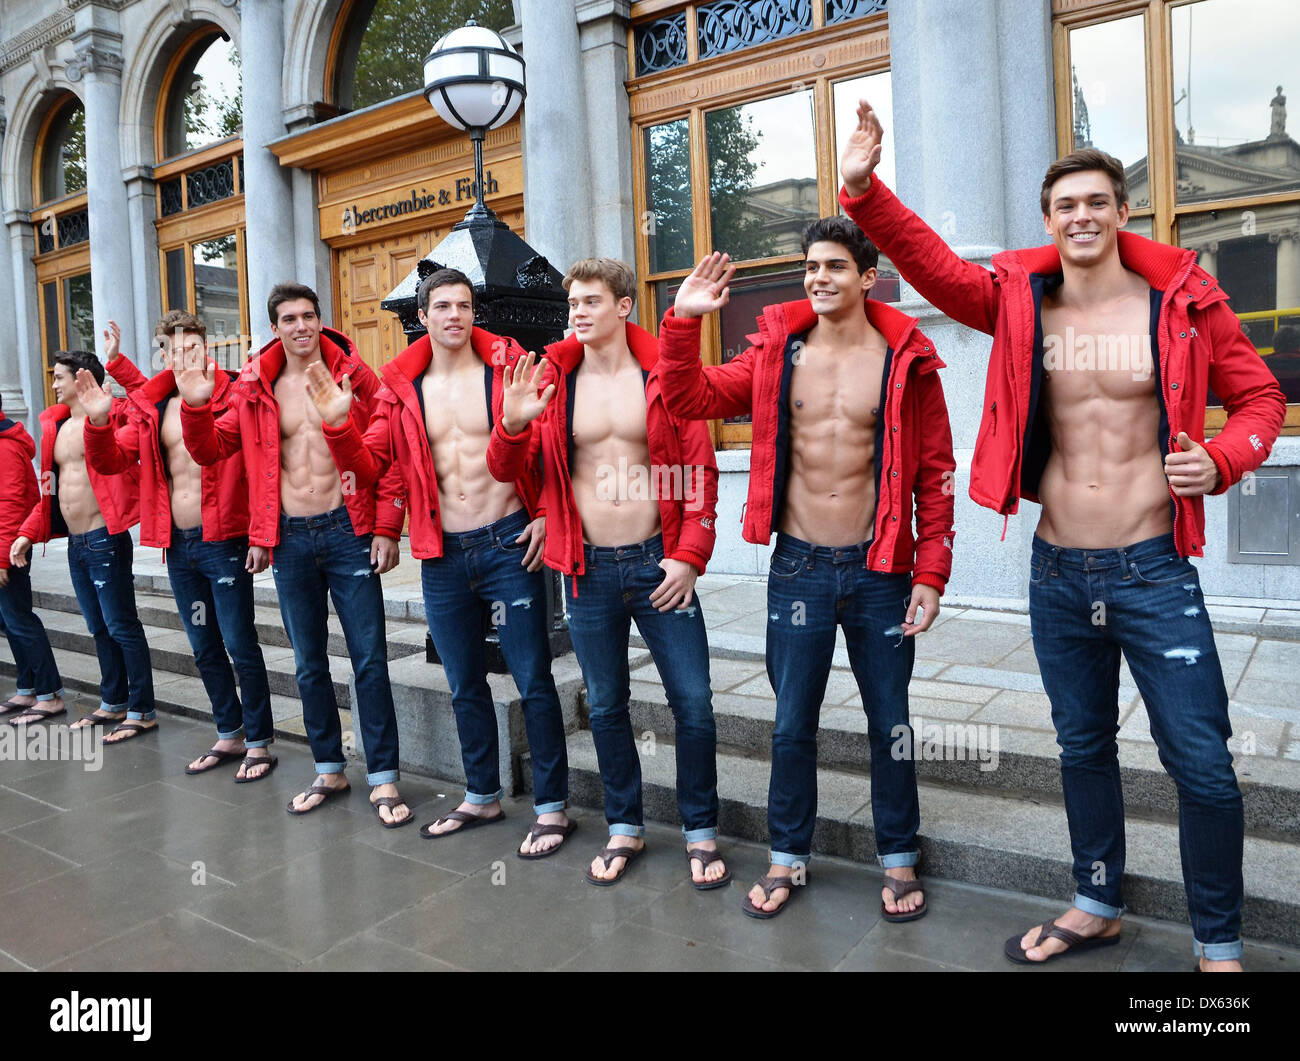 abercrombie ie and fitch